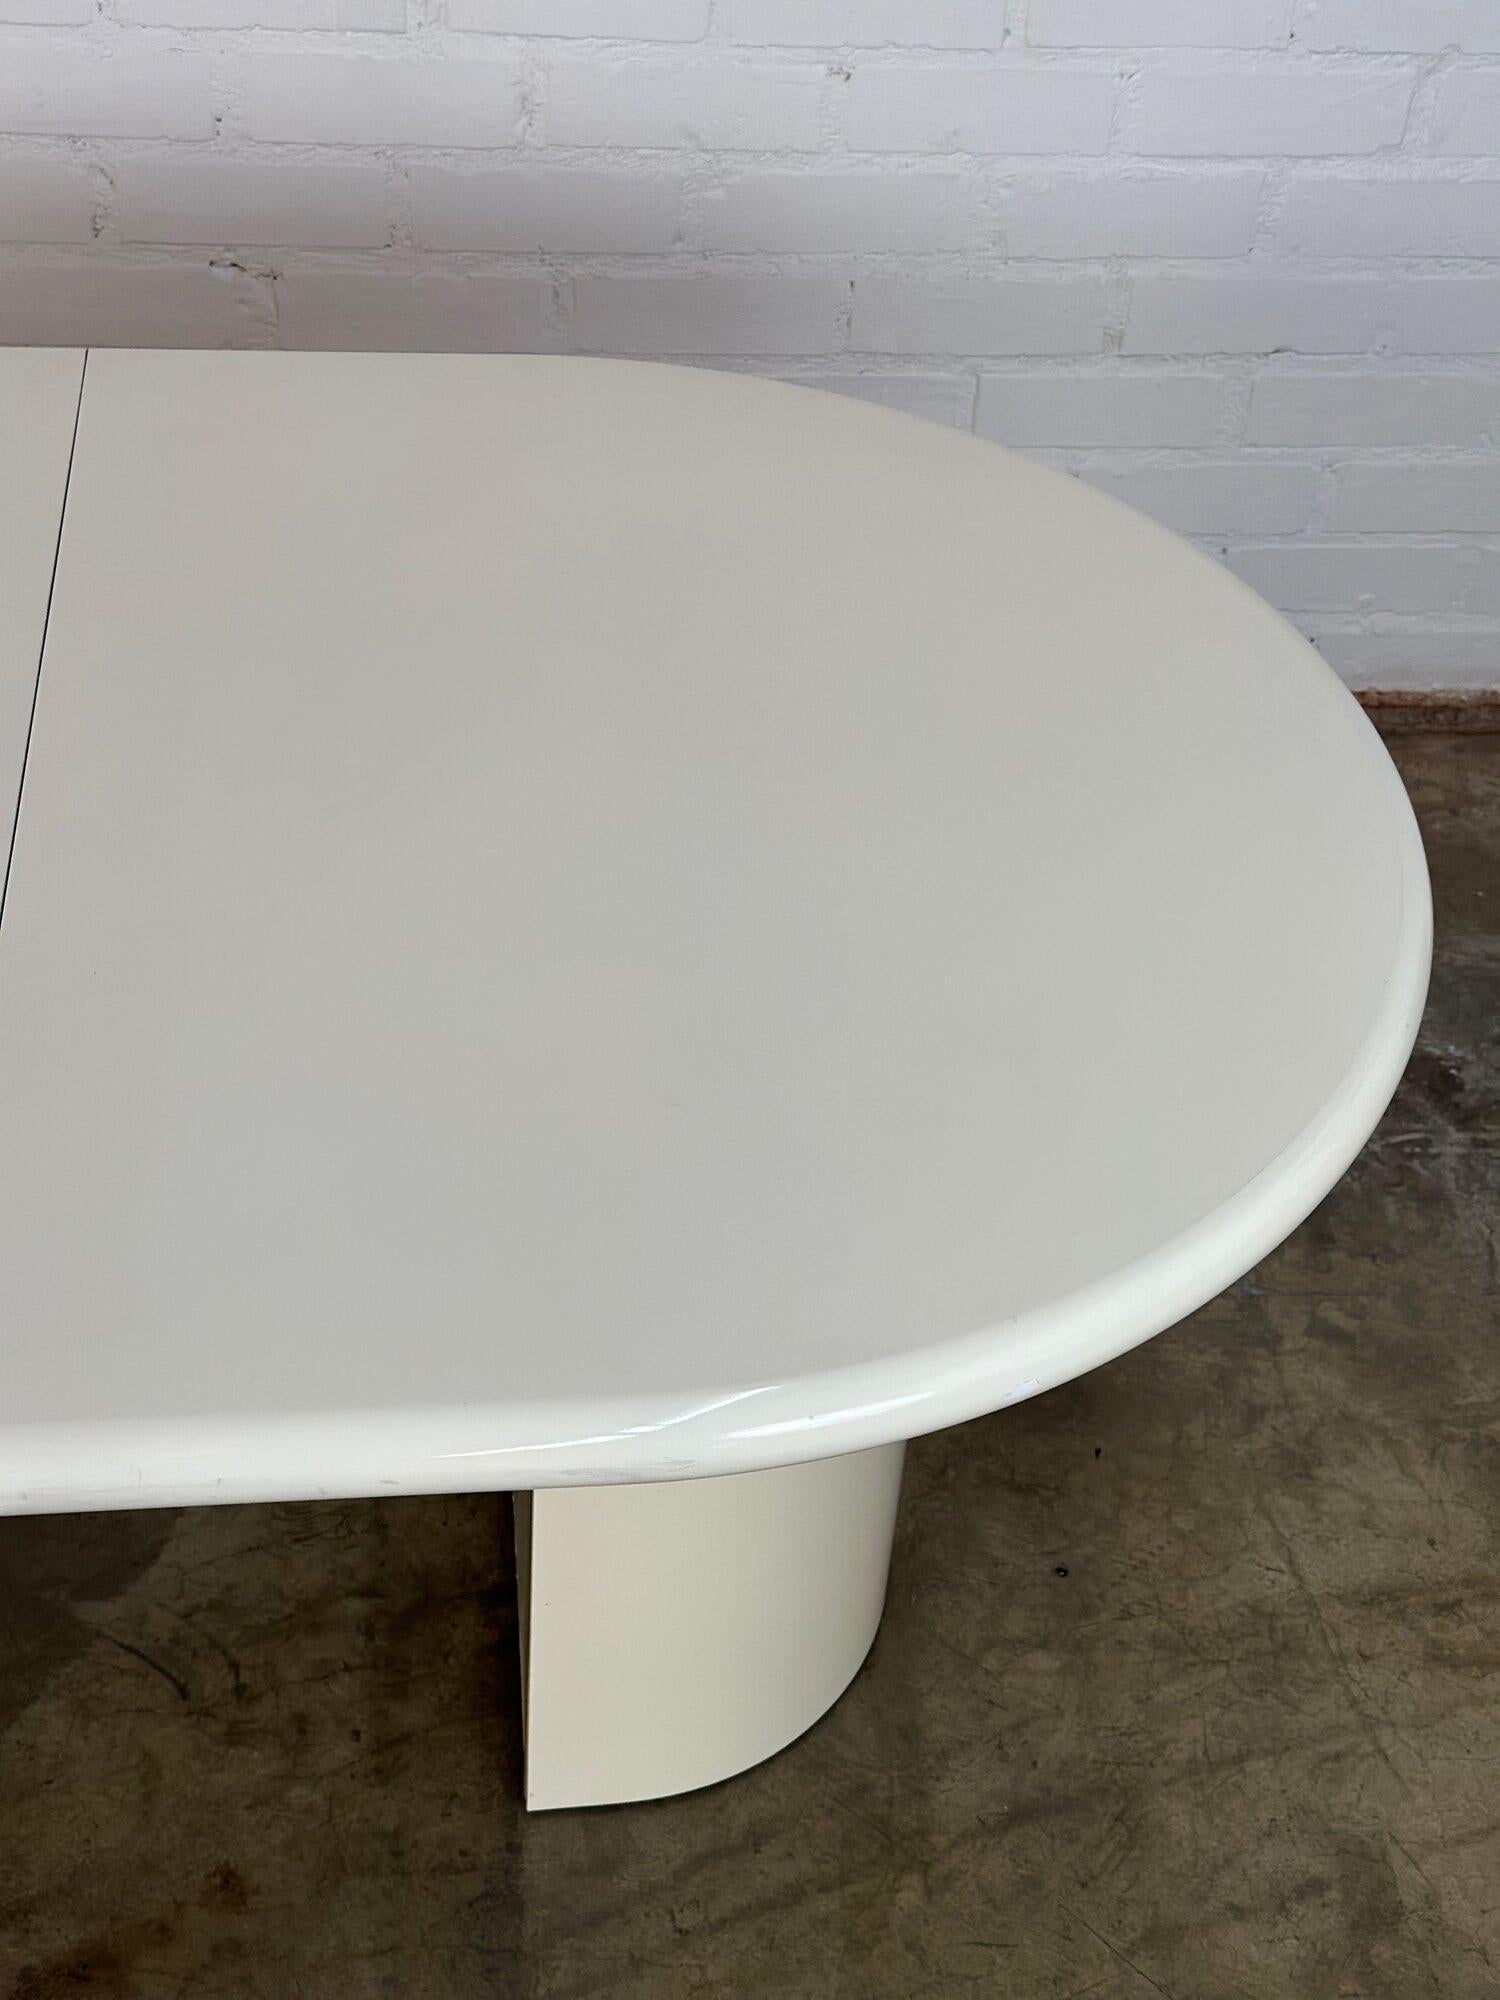 W67 W103 D42 H28.5 KNEE CLEARANCE 27.5

LEAVES 18

Vintage post modern laminate dining table im overall good vintage condition. Table has is structurally sound and fully functional with very minimal wear. Wear has been pictured closely.